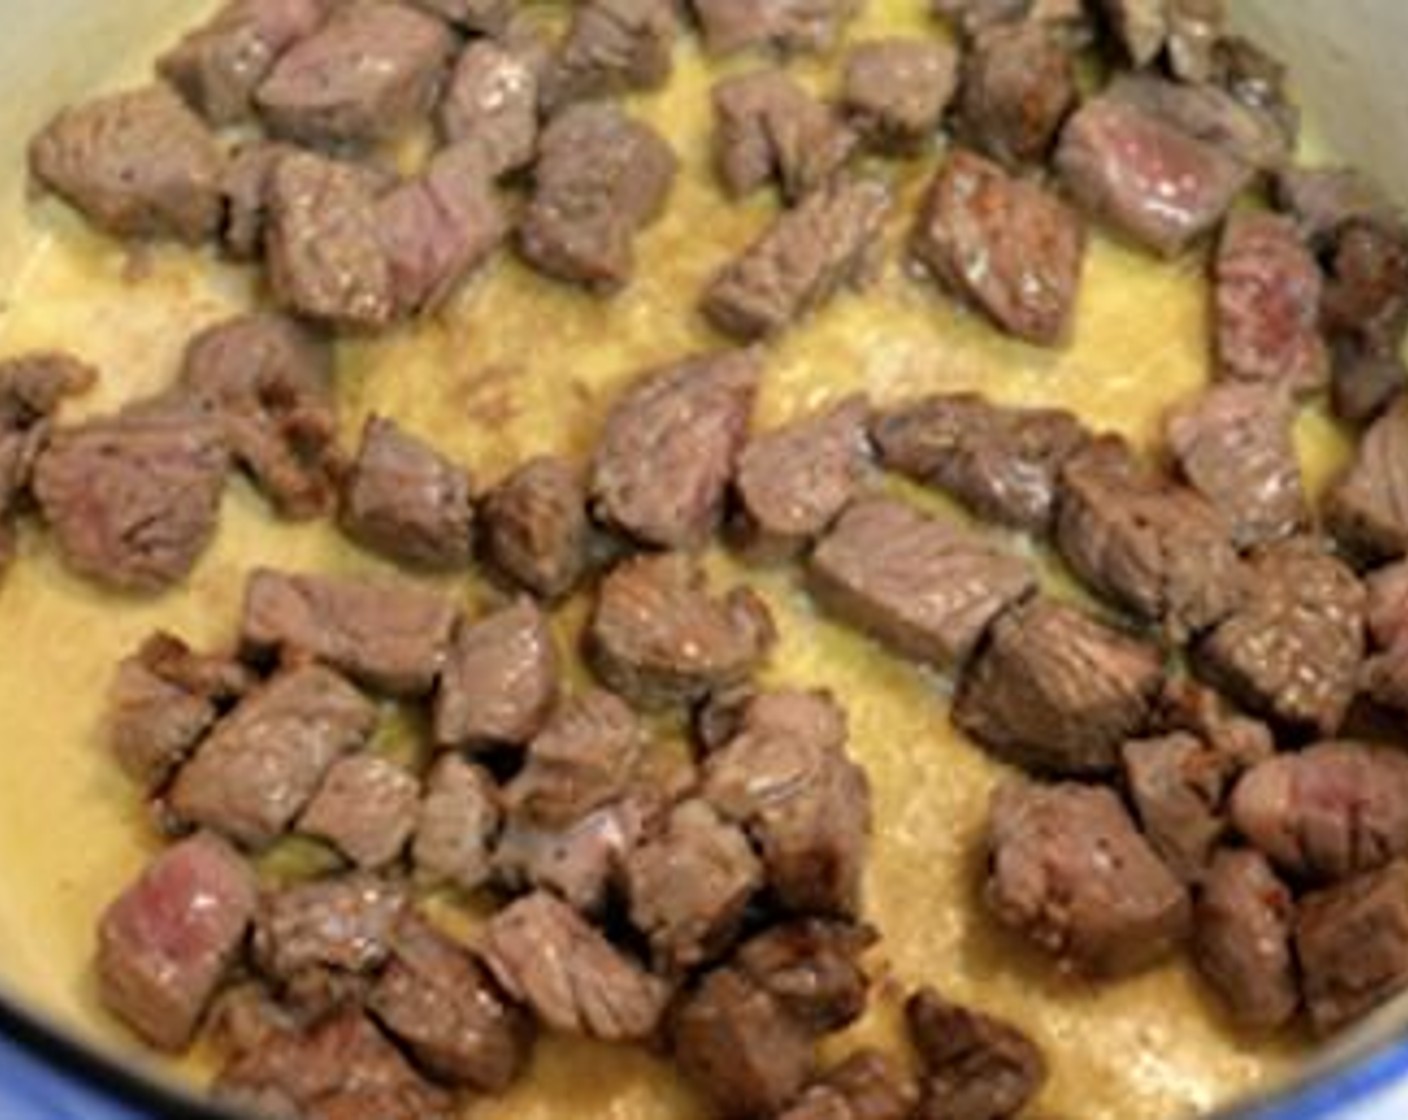 step 4 Add Olive Oil (2 Tbsp) to a hot dutch oven/large pot. Brown the beef pieces on all sides in batches and once they're browned well, remove them with a slotted spoon and set them aside on a plate. Repeat until the beef is browned.